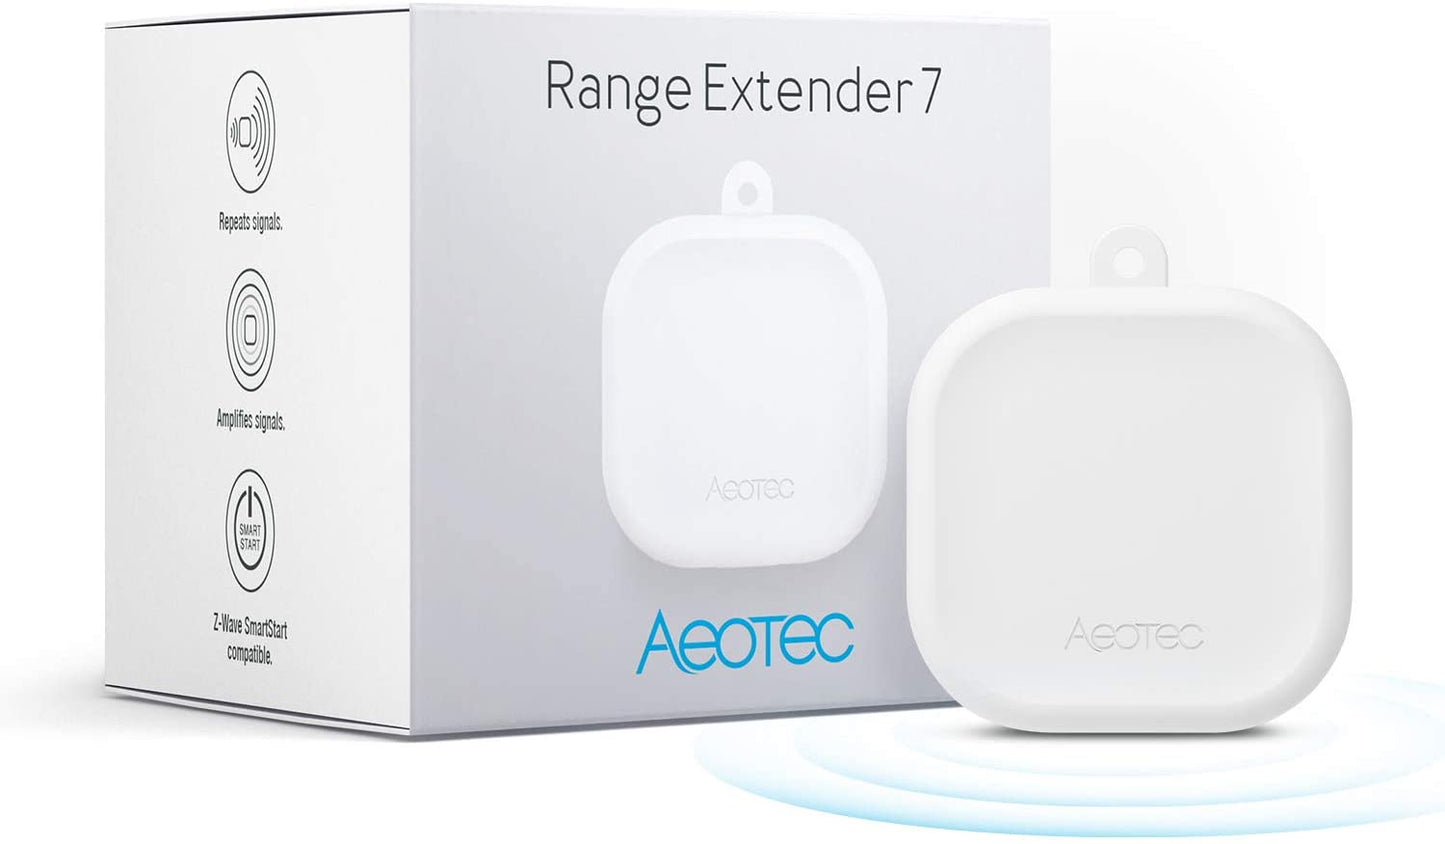 Aeotec Range Extender 7; Zwave Extender and Repeater, Z-Wave Plus 700 series, S2, Smart Start (ZW189)